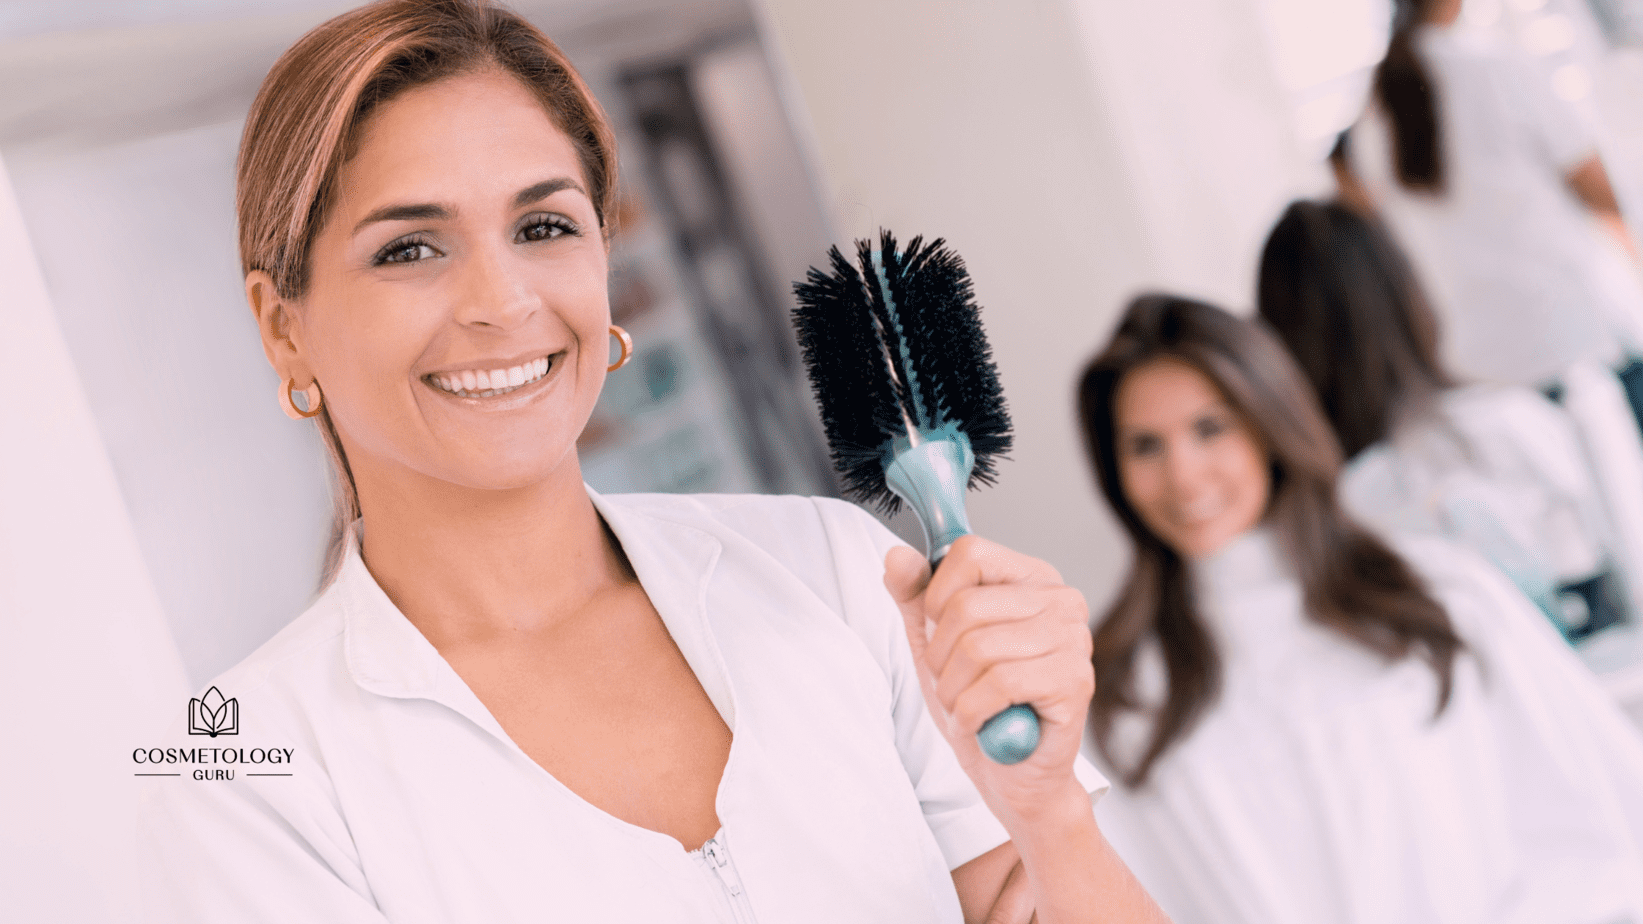 The Top 7 Highest-Paying Salon Manager Jobs in 2022